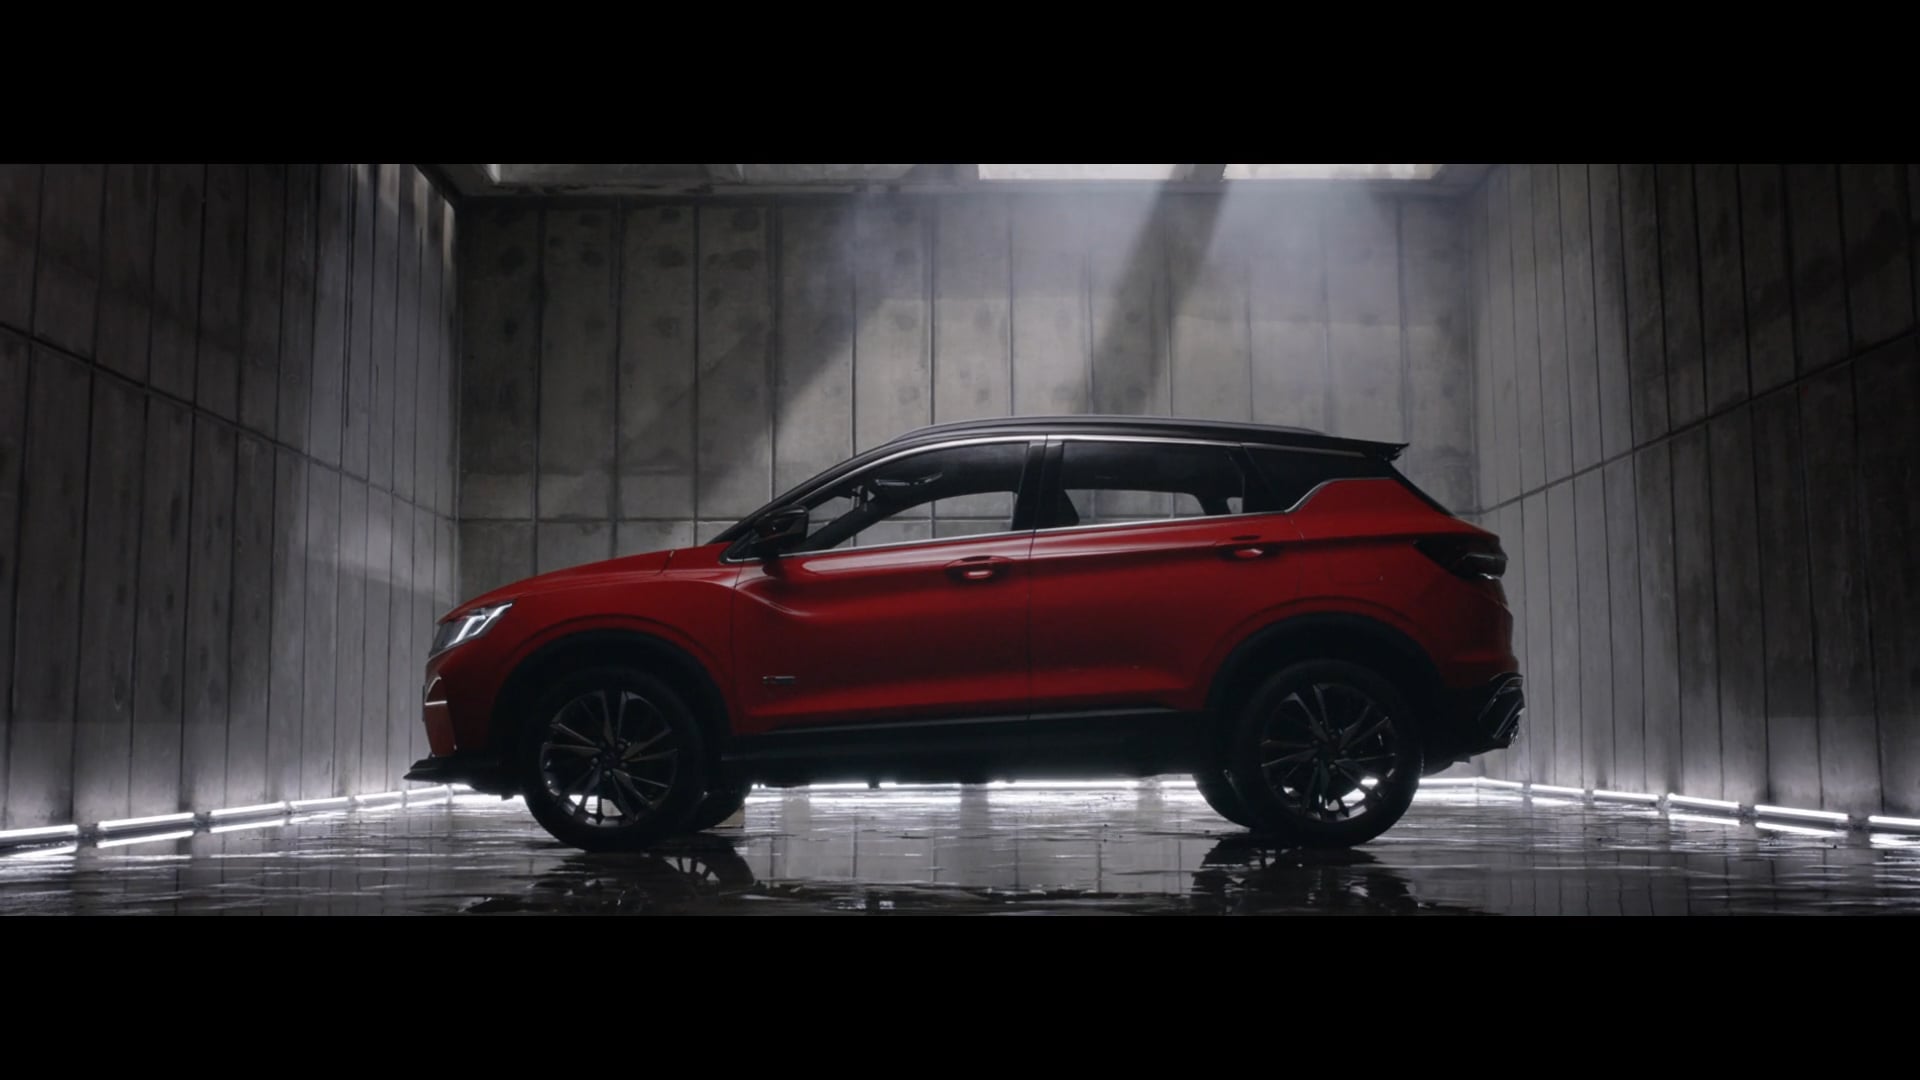 PROTON X50 "Get Ahead of The Game" Director's Cut